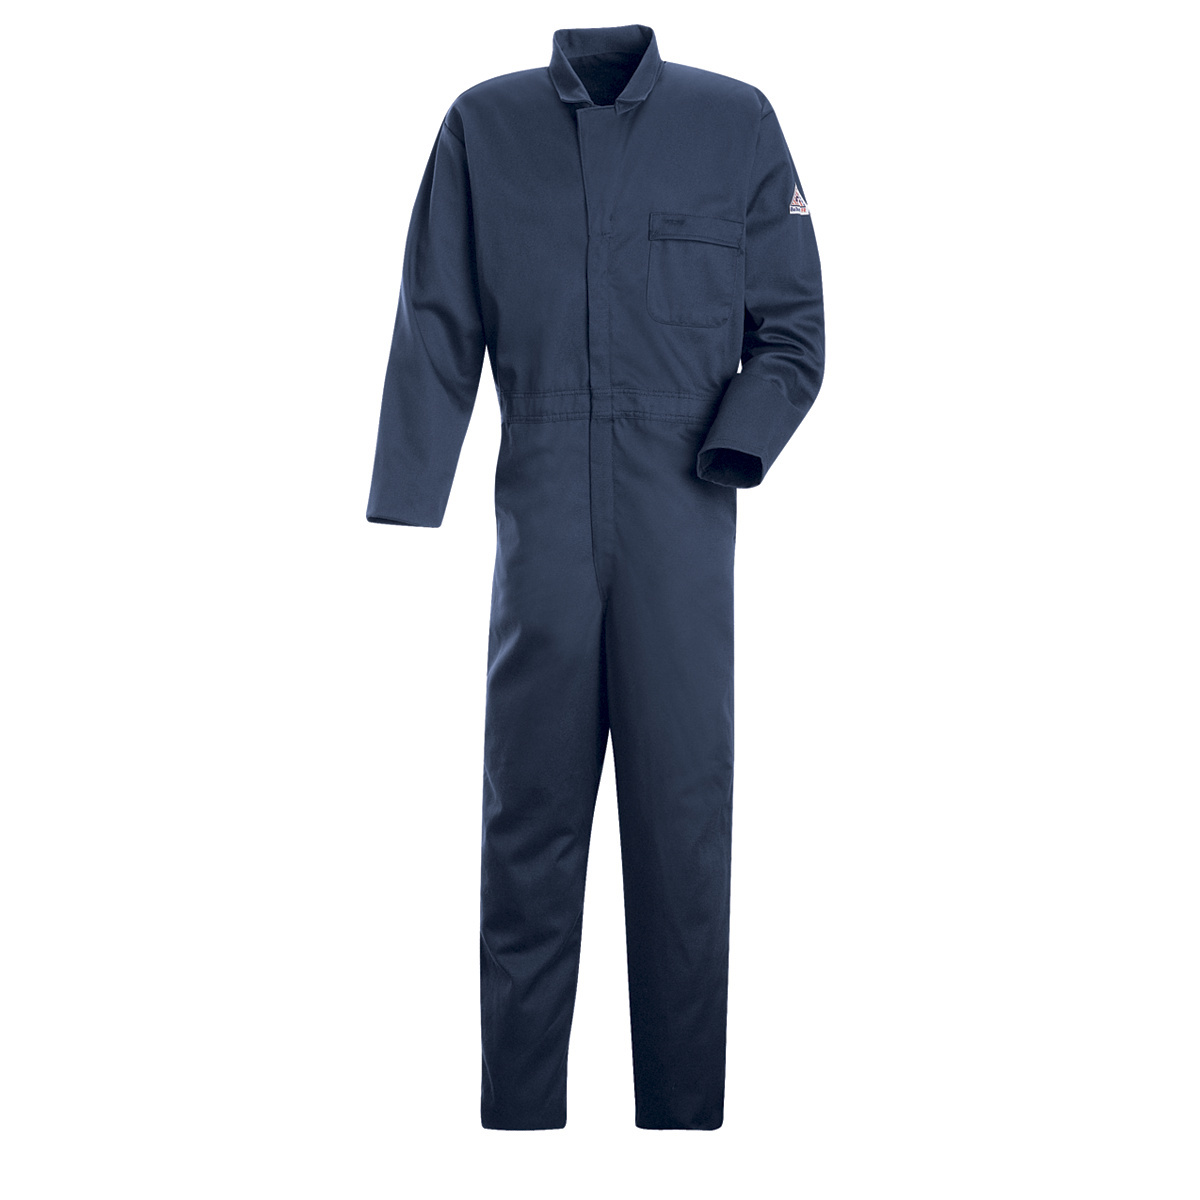 Bulwark® Medium Tall Navy Blue EXCEL FR® Twill Cotton Flame Resistant Coveralls With Zipper Front Closure